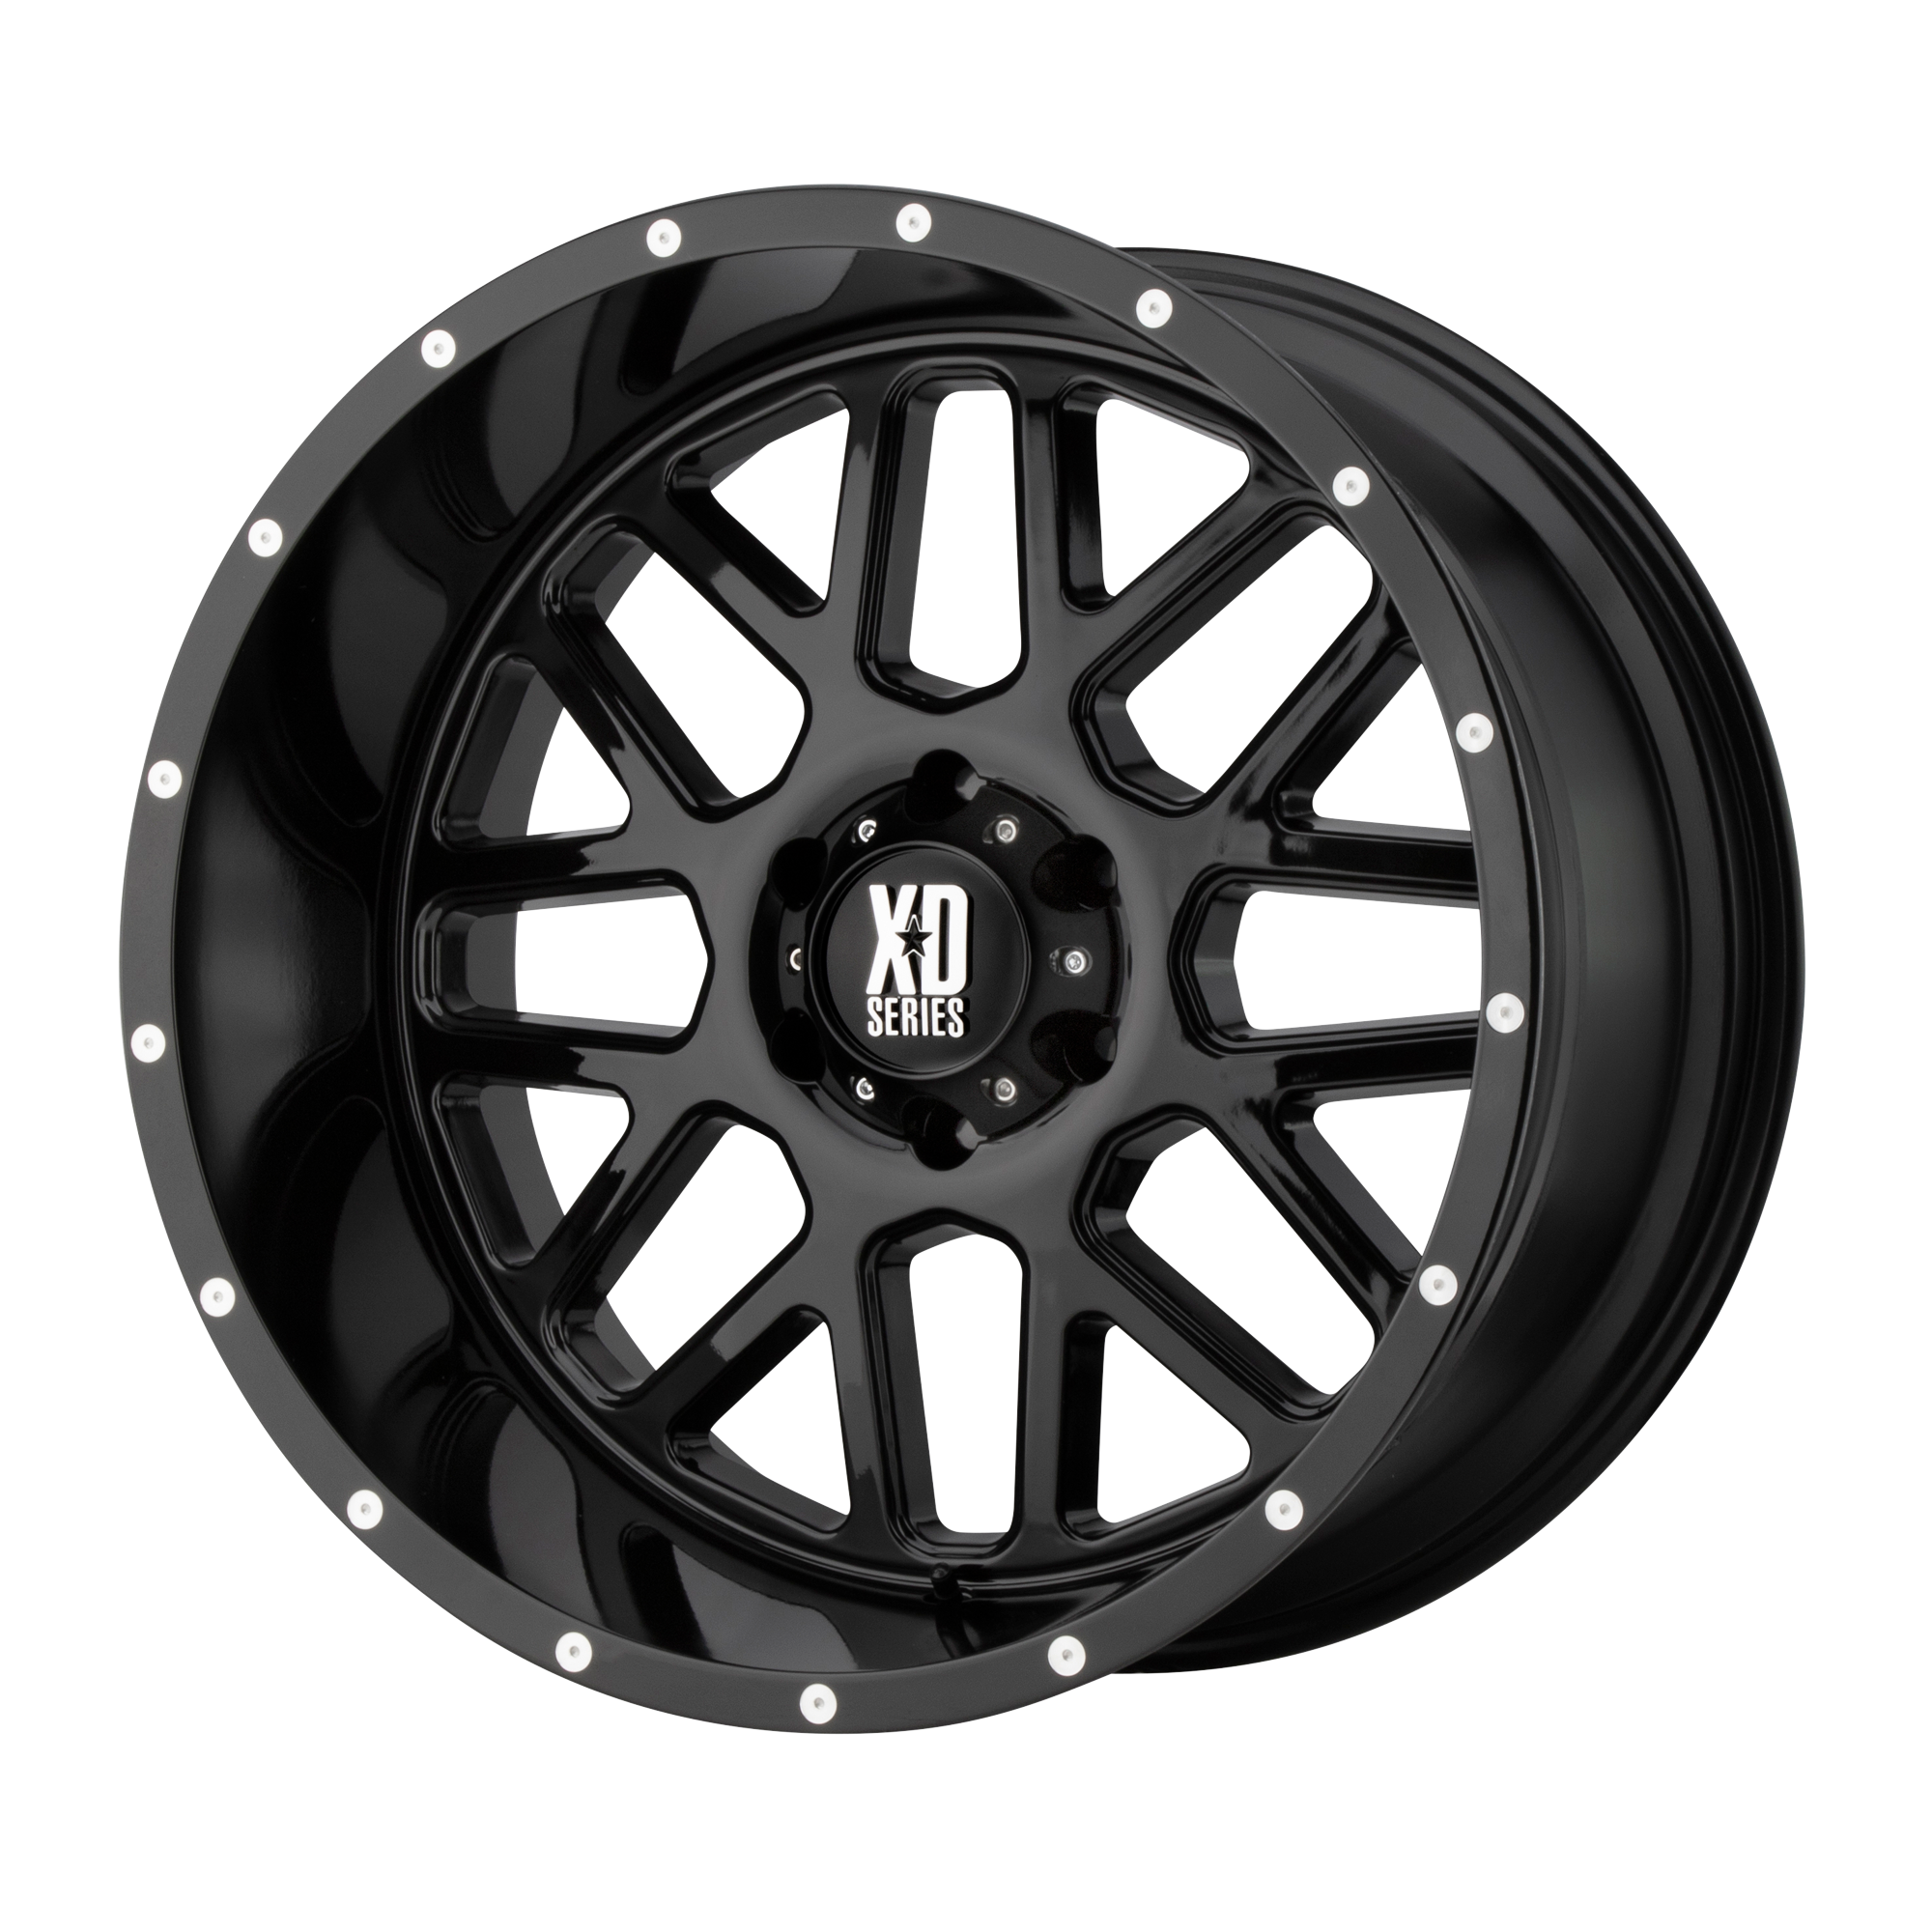 GRENADE 17x8.5 5x127.00 GLOSS BLACK (0 mm) - Tires and Engine Performance